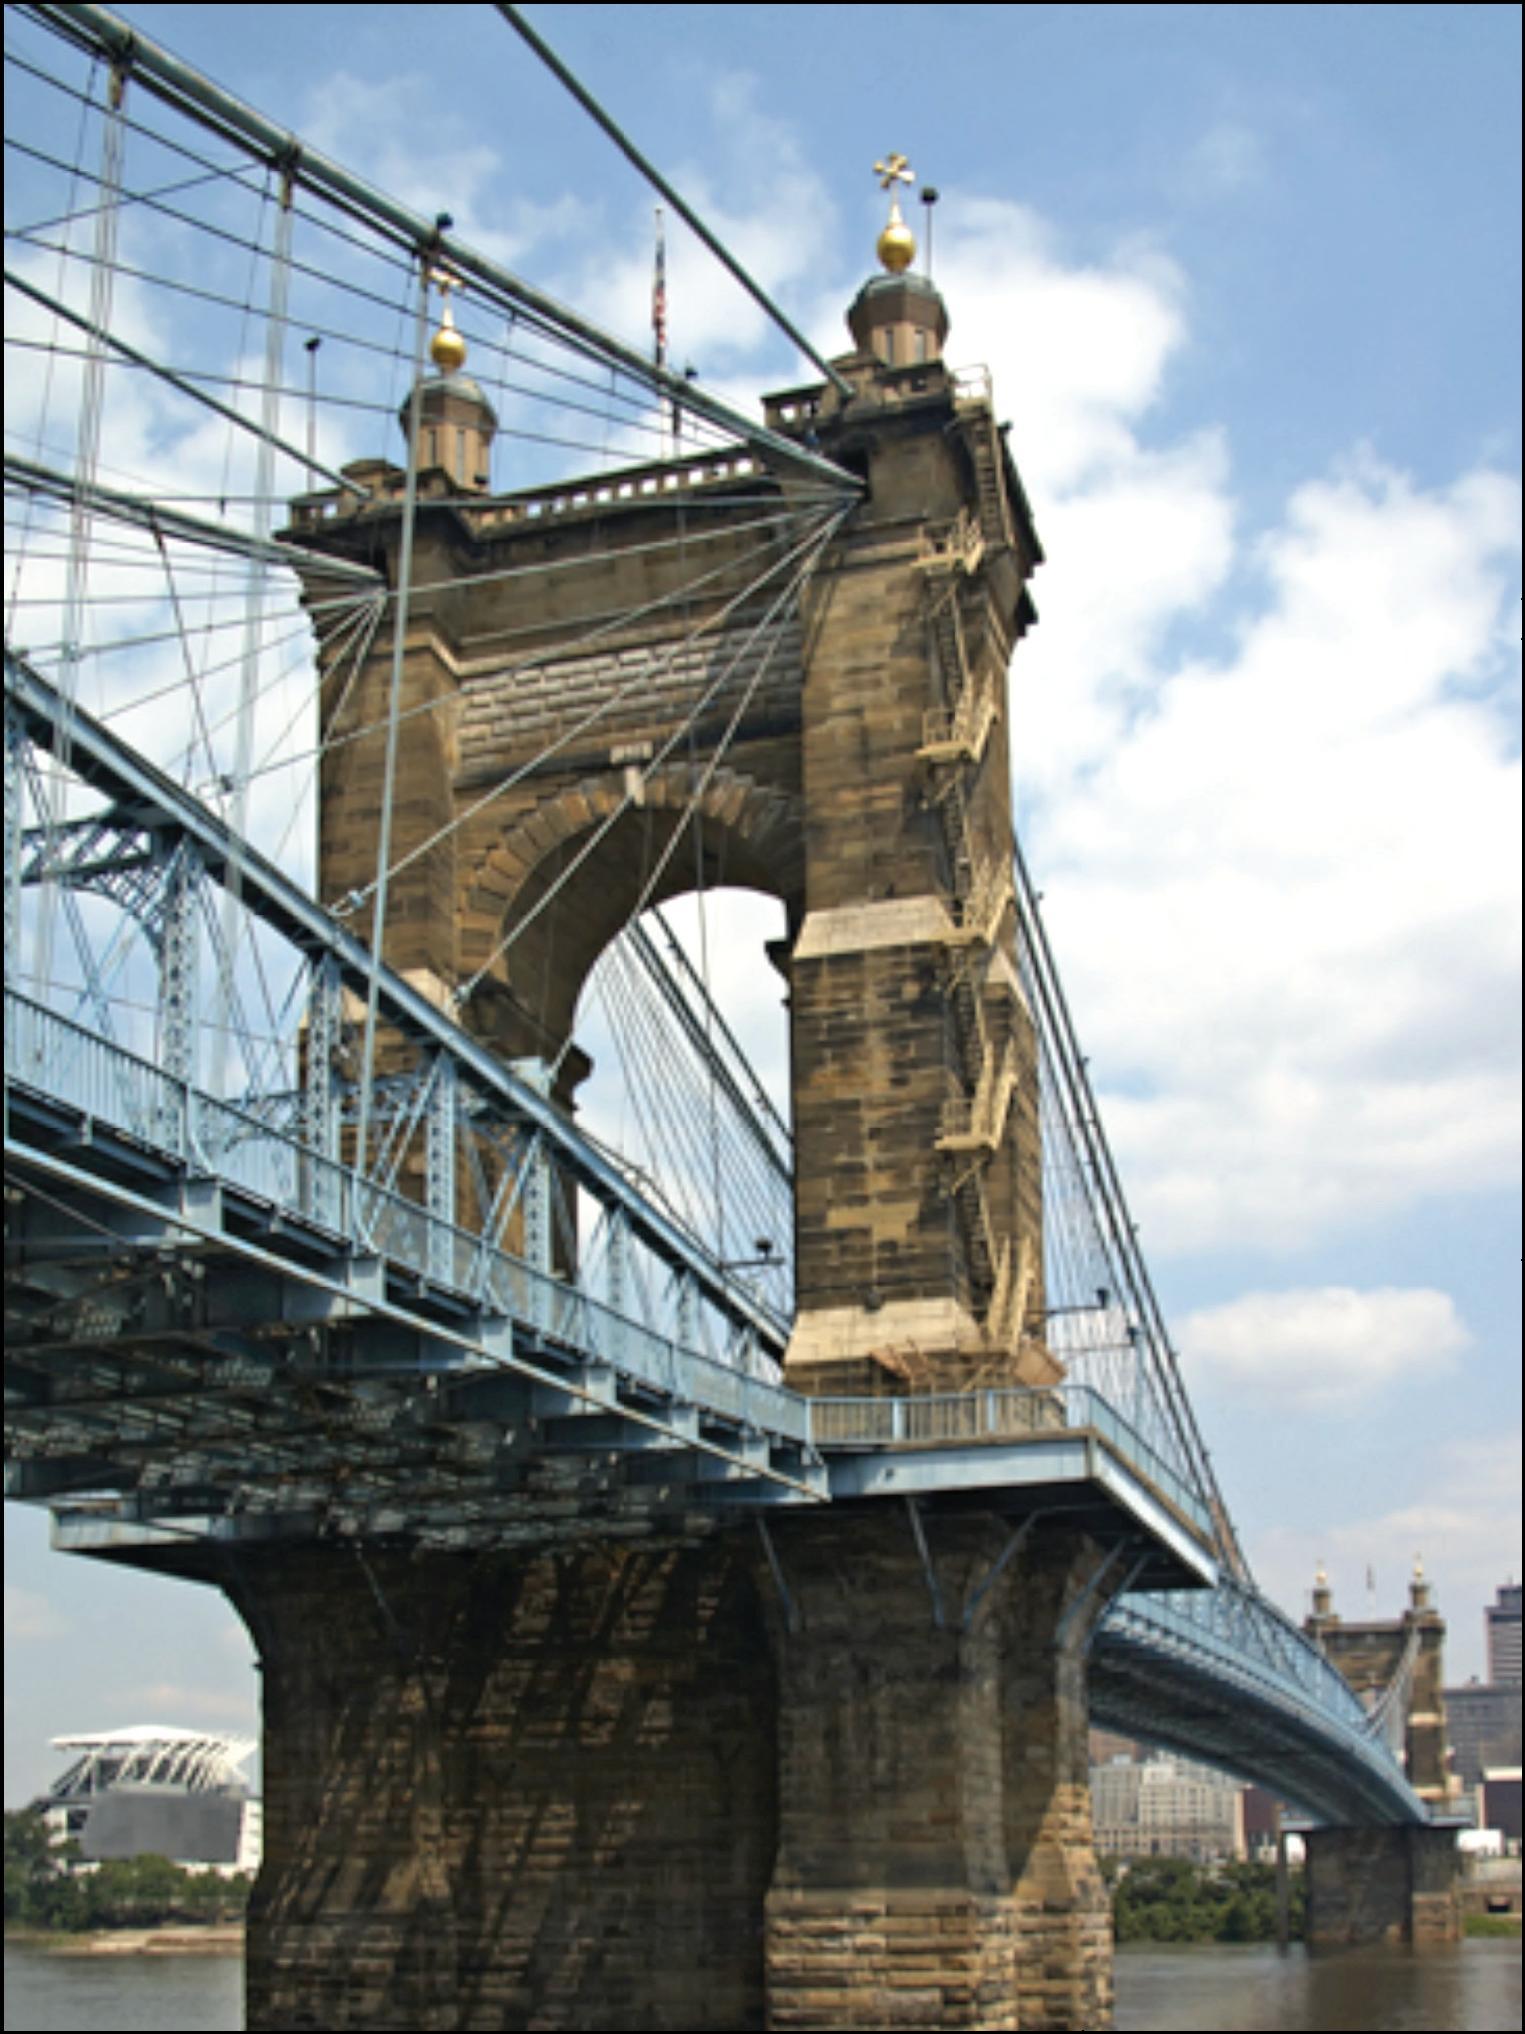 Figure 10 is a picture of the Charles Roebling bridge that crosses the Ohio River between Cincinnati Ohio and Covington Kentucky. The bridge is a built of stone and steel cables and resembles a smaller version of the famous Brooklyn Bridge that also was built by Charles Roebling. The picture illustrates that some bridges are unique and historic and do not lend themselves for the generalized, planning-level analysis that is required to compute a statewide sustainabilty ratio. 